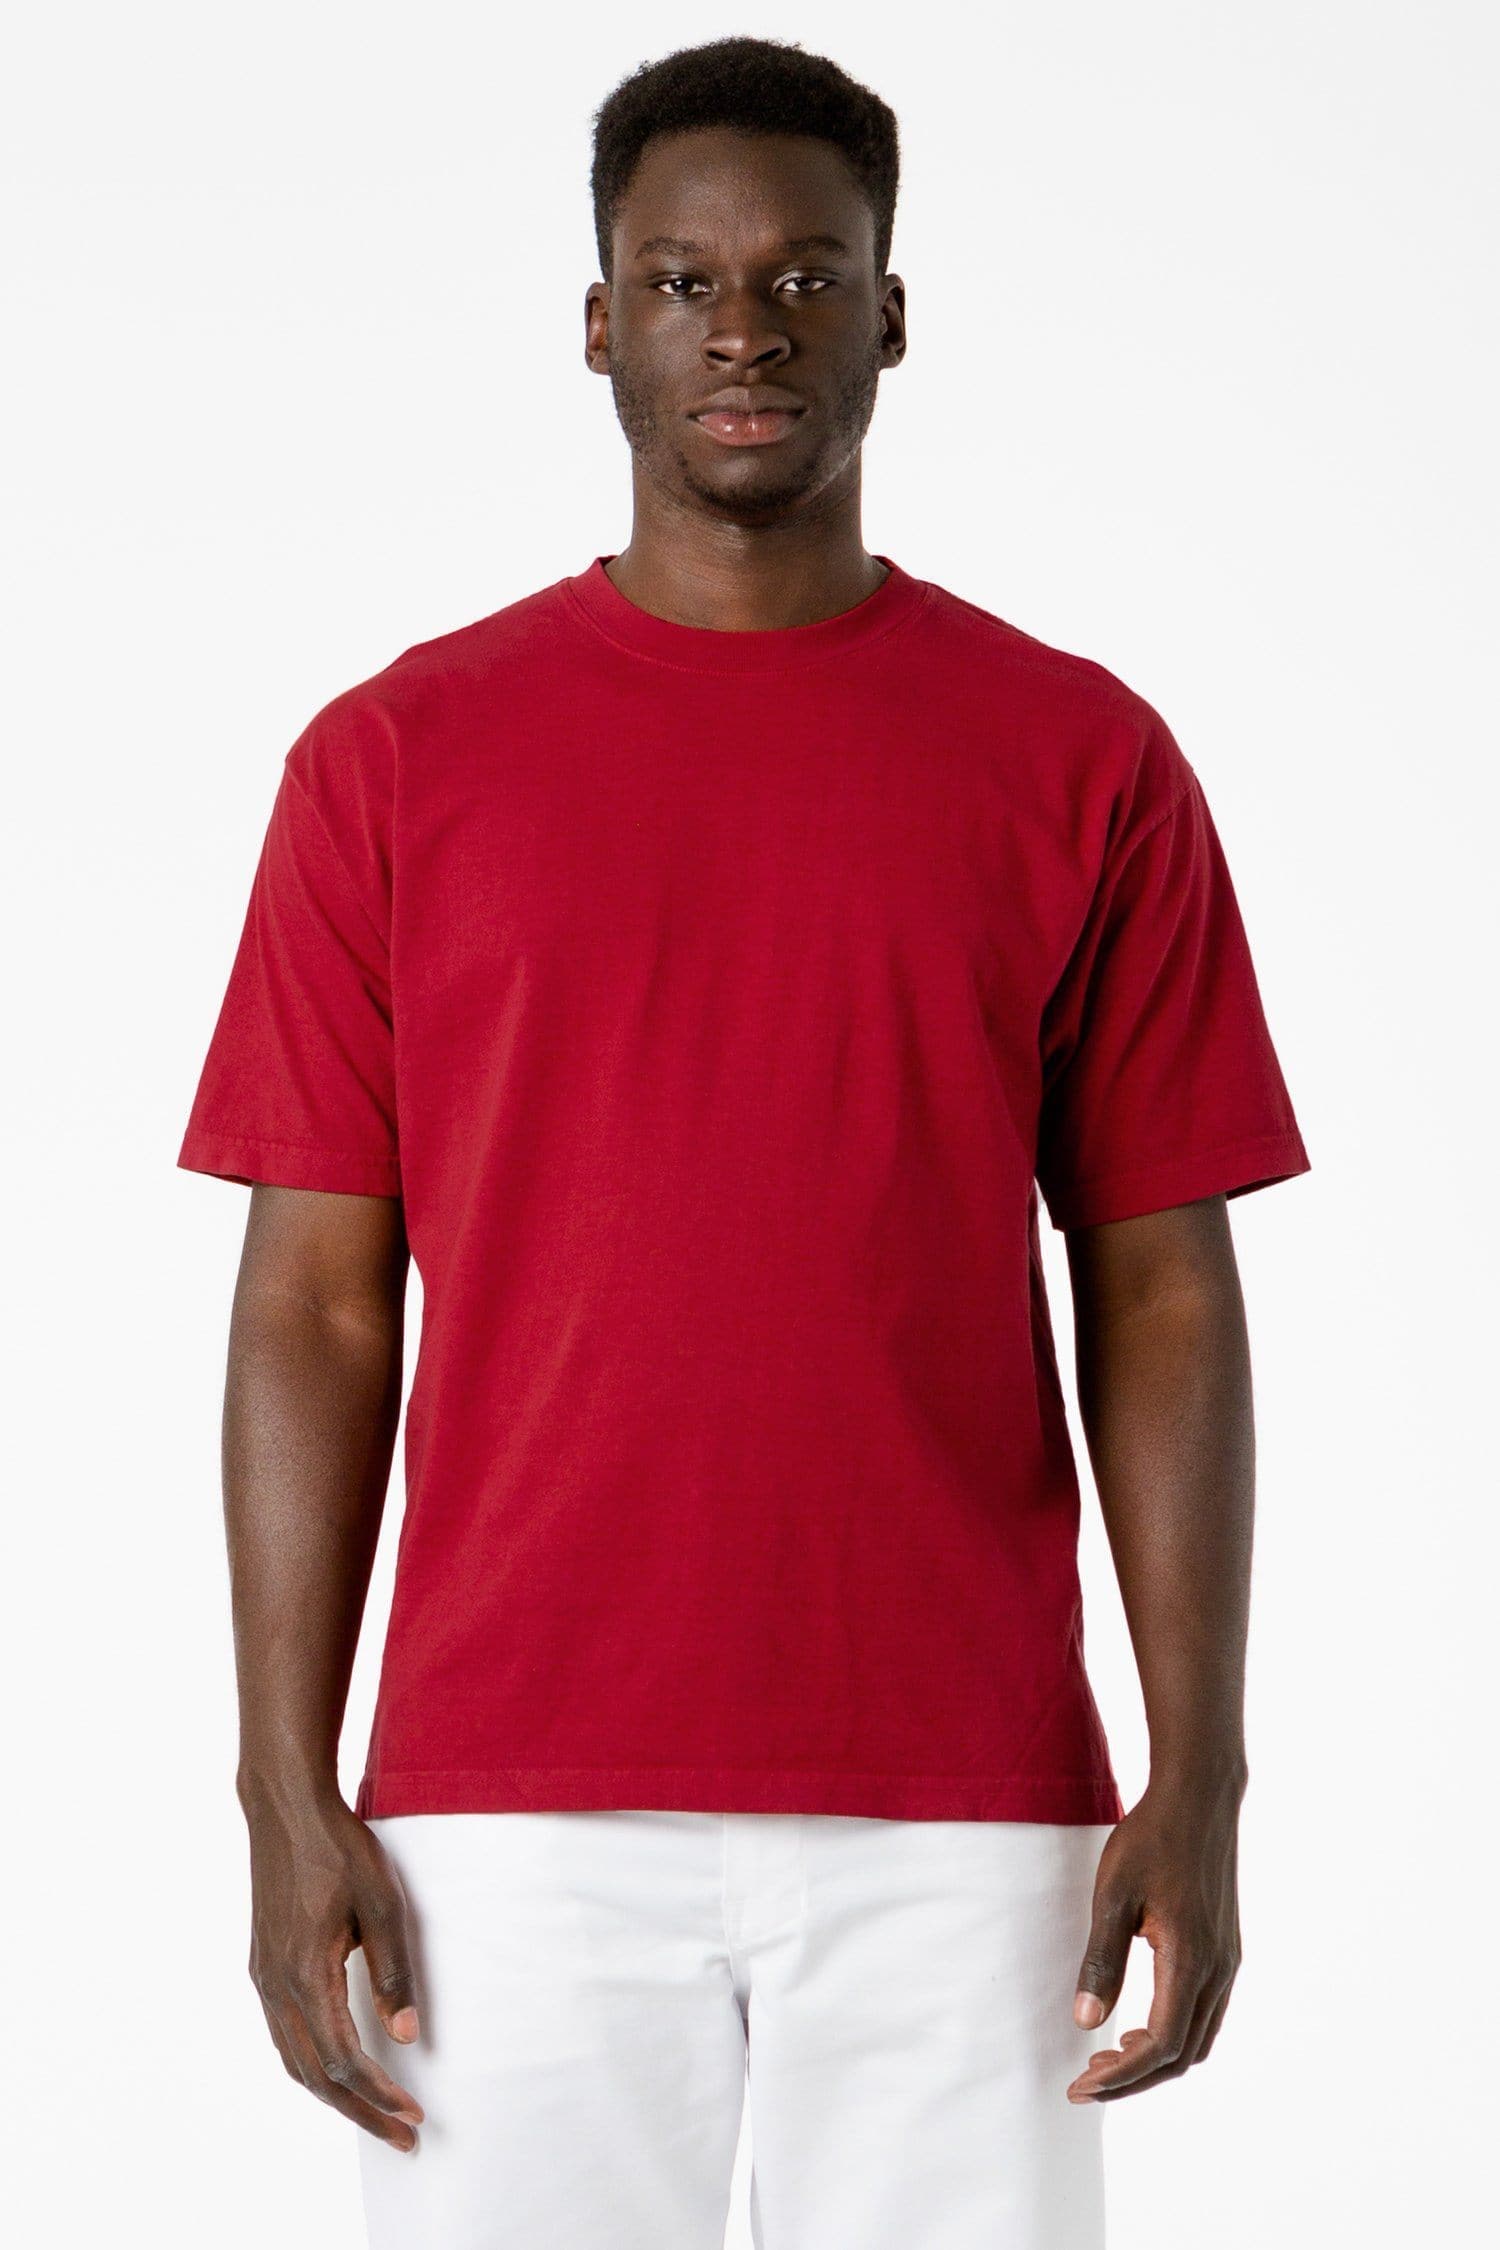 Los Angeles Apparel | The 1801 | Shirt Pigment Dye in Clove, Size Large | Crew Neck